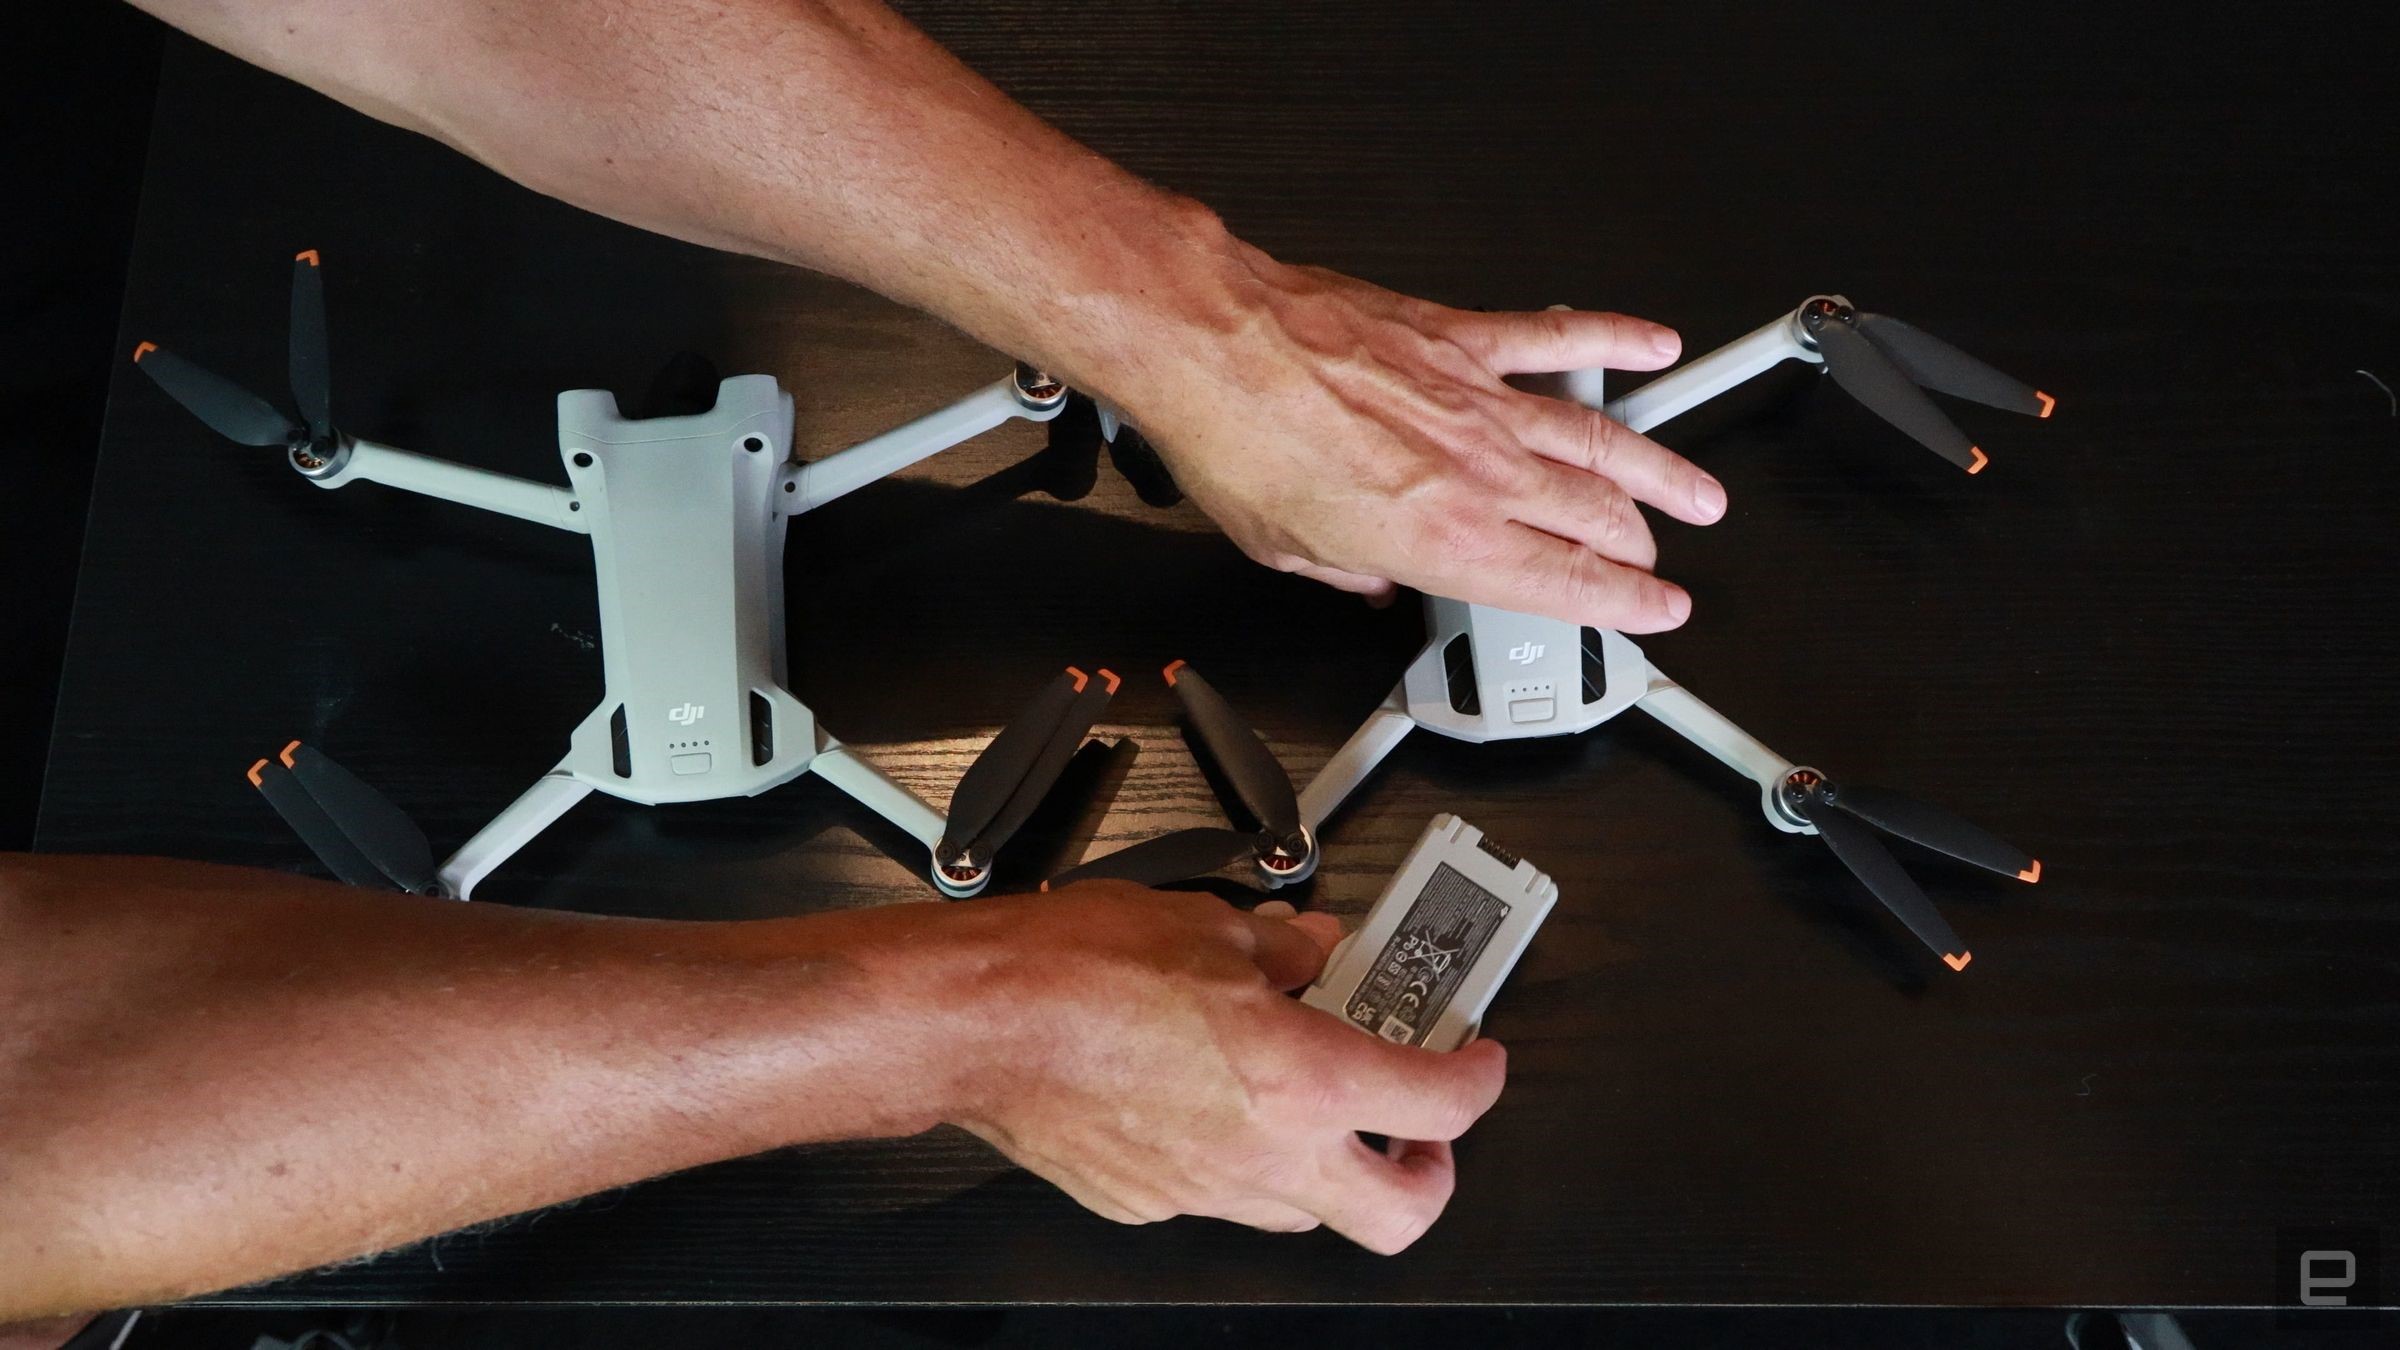 DJI Mini 4 Pro review: The best lightweight drone gains more power and smarts | DeviceDaily.com